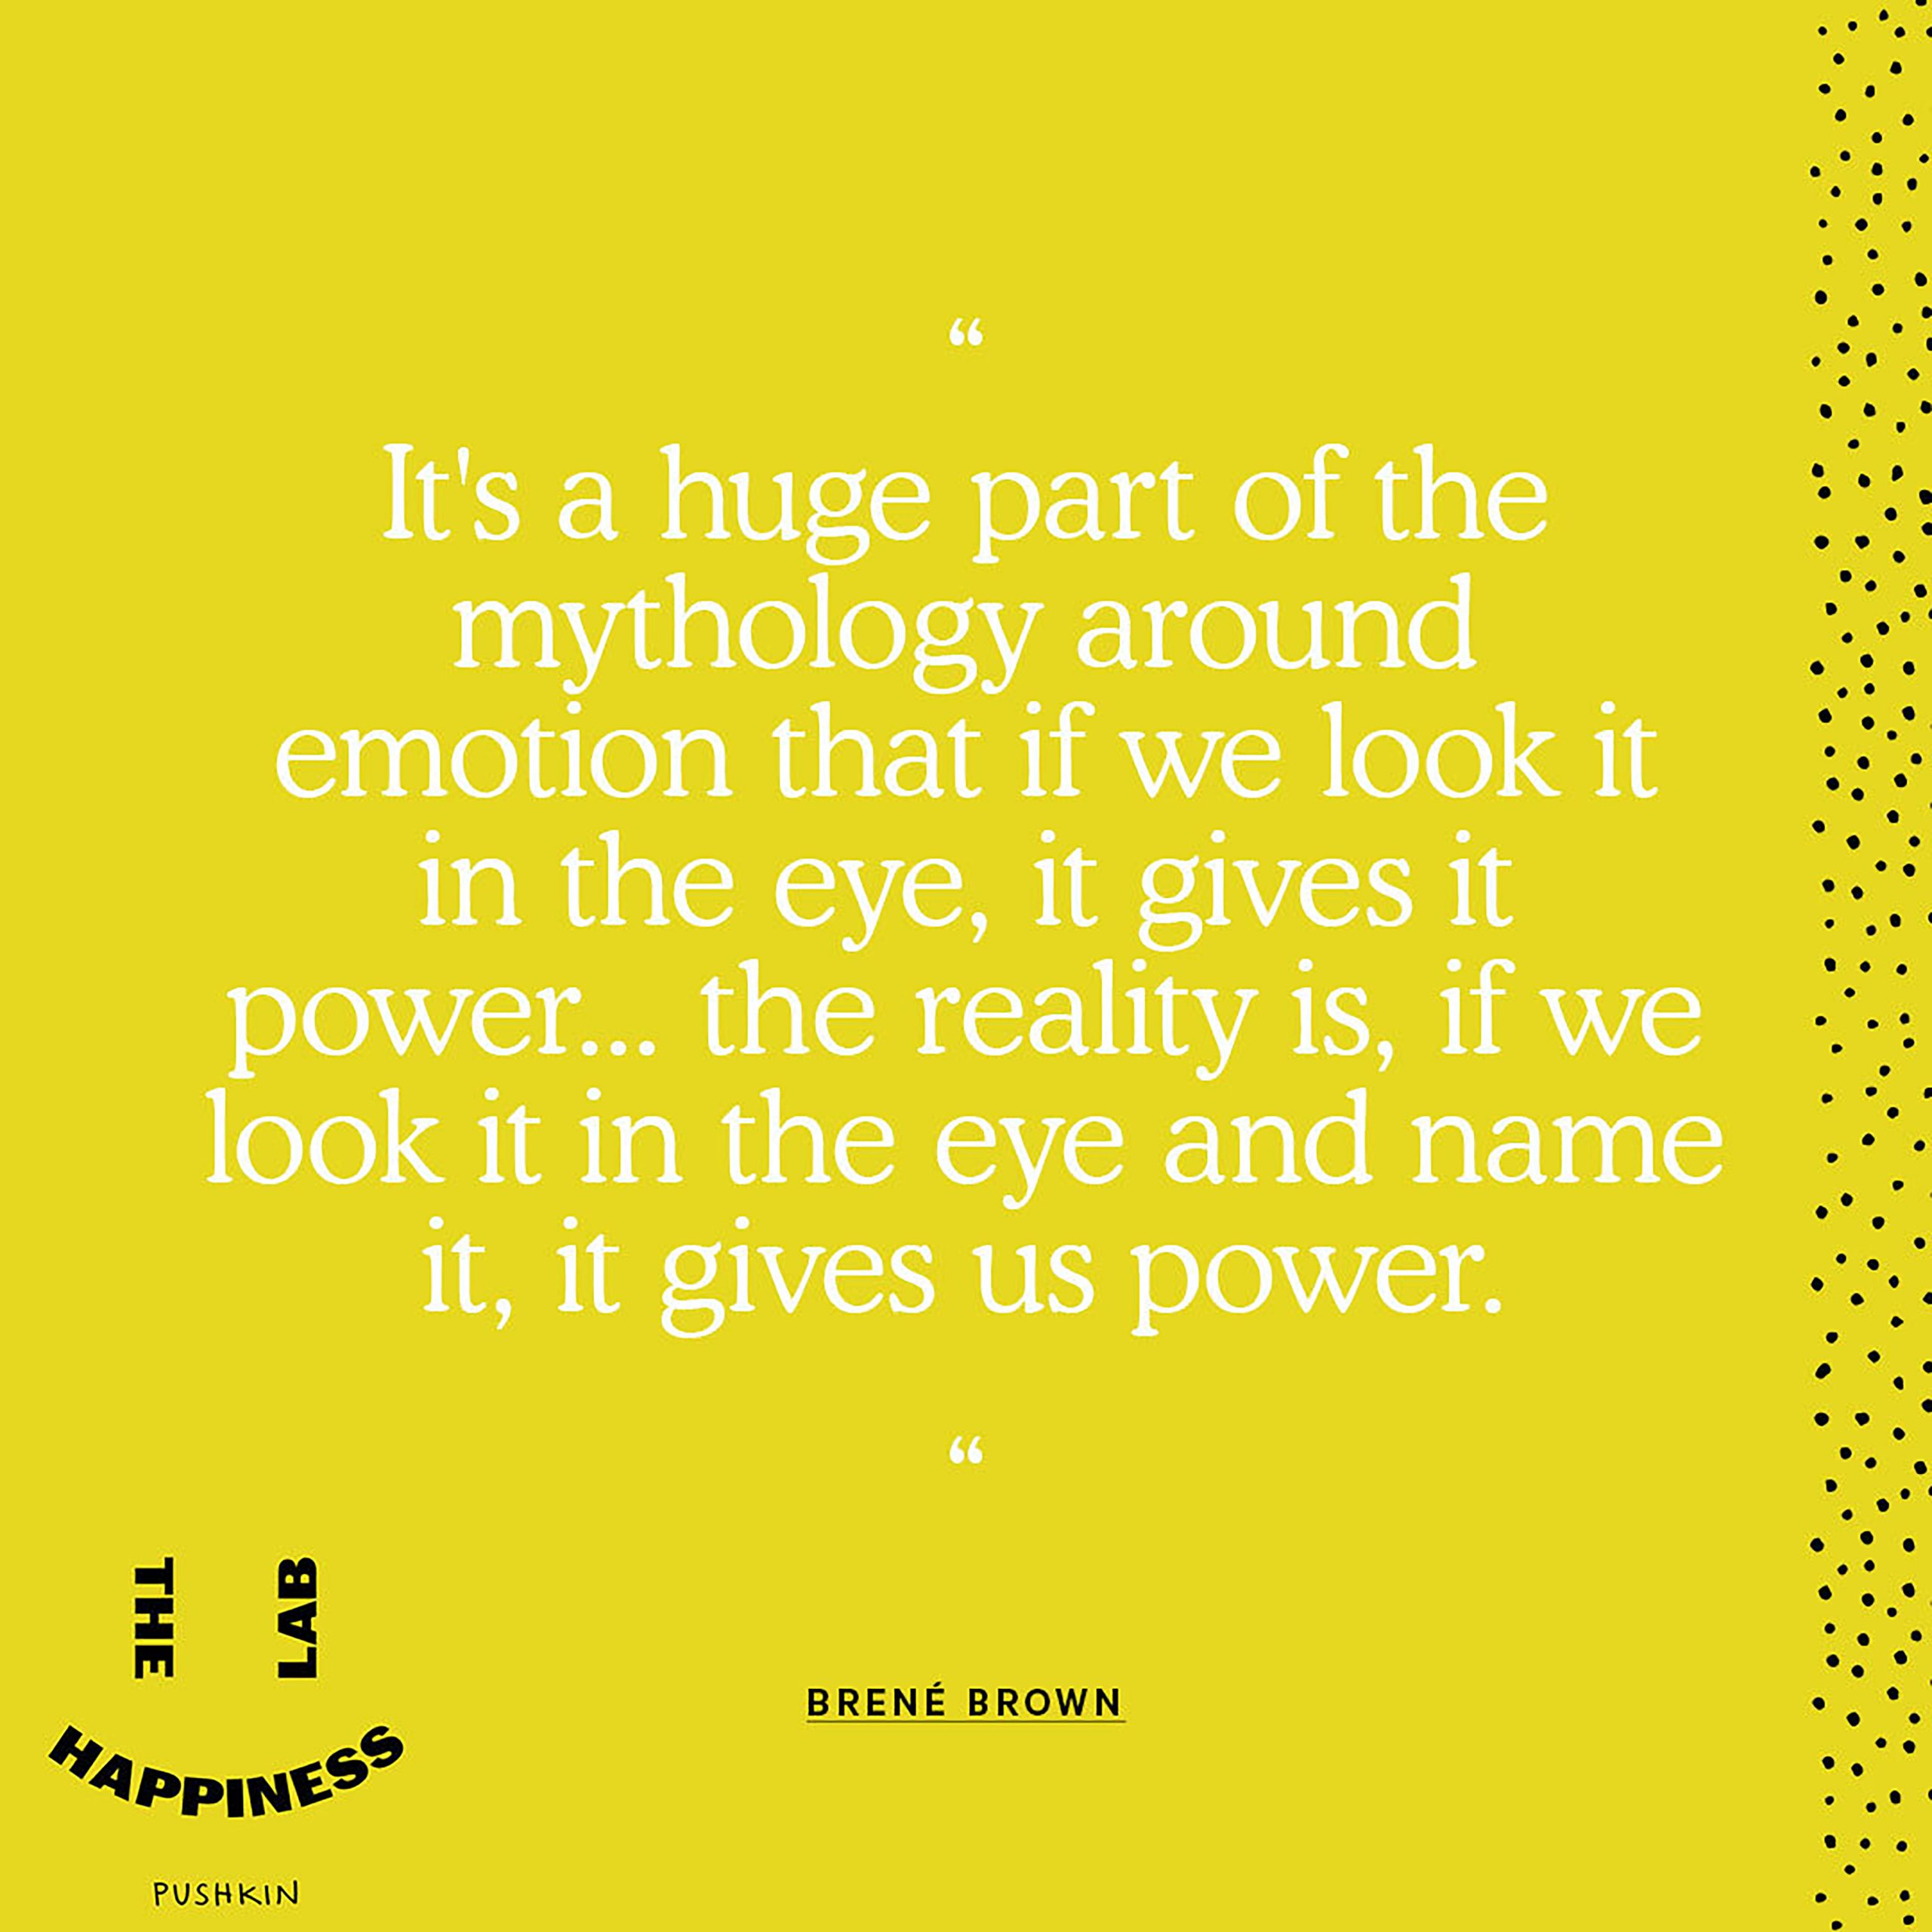 A quote from Brené Brown on the Happiness Lab podcast, with Dr. Laurie Santos: It’s a huge part of the mythology around emotion that if we look it in the eye, it gives it power...the reality is, if we look it in the eye and name it, it gives us power.